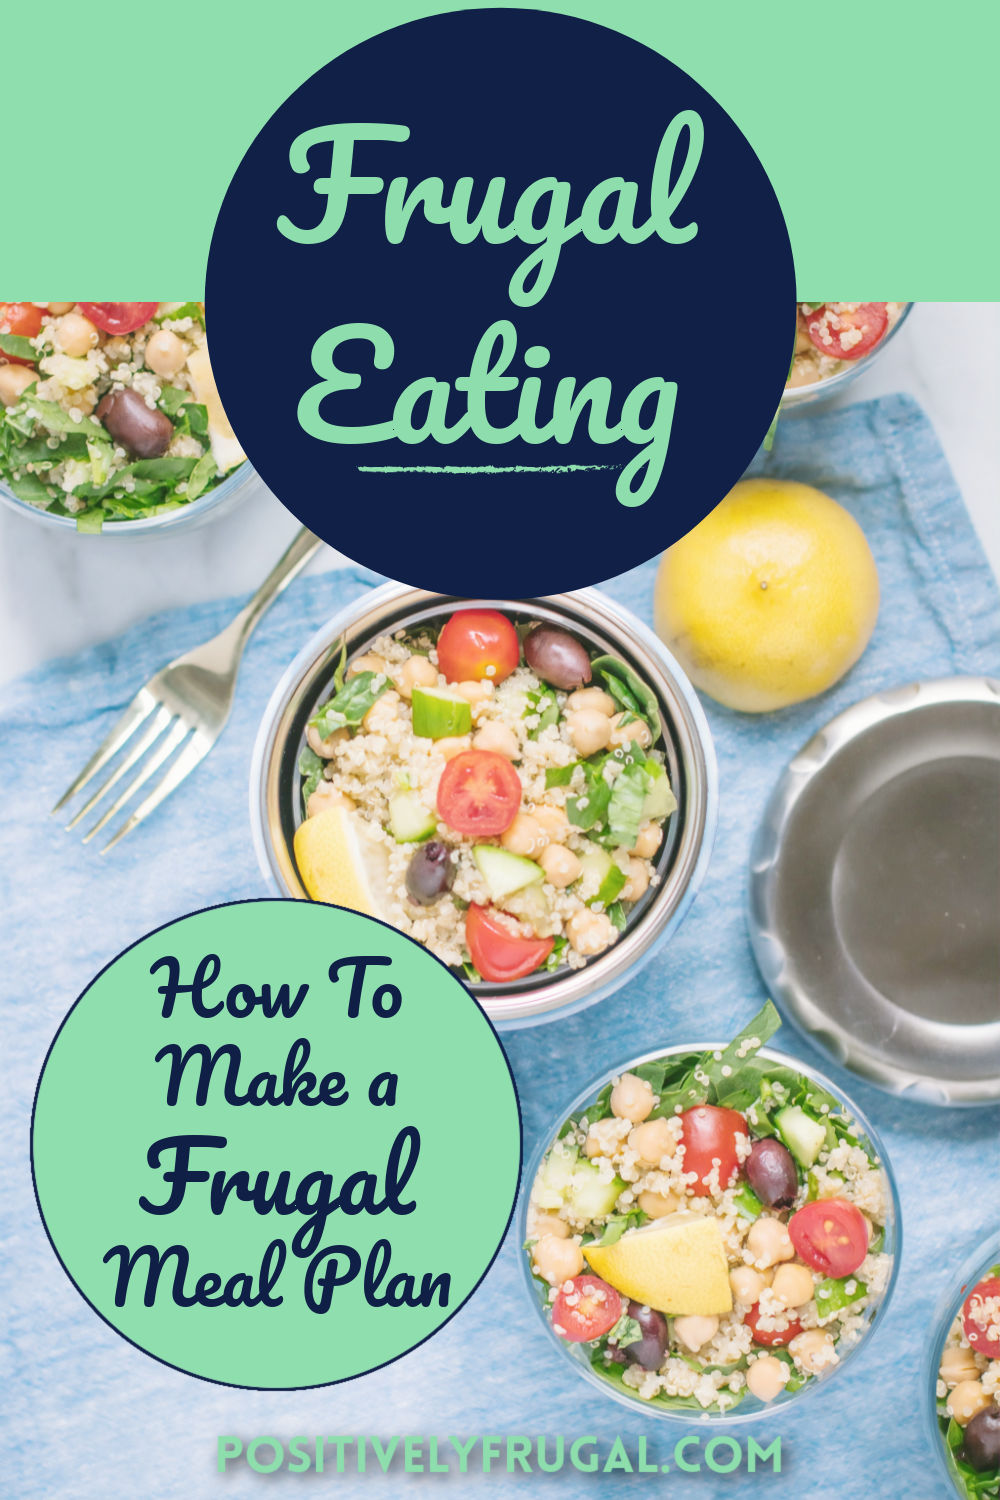 Frugal Meal Planning: 5 Tips for Success - Positively Frugal